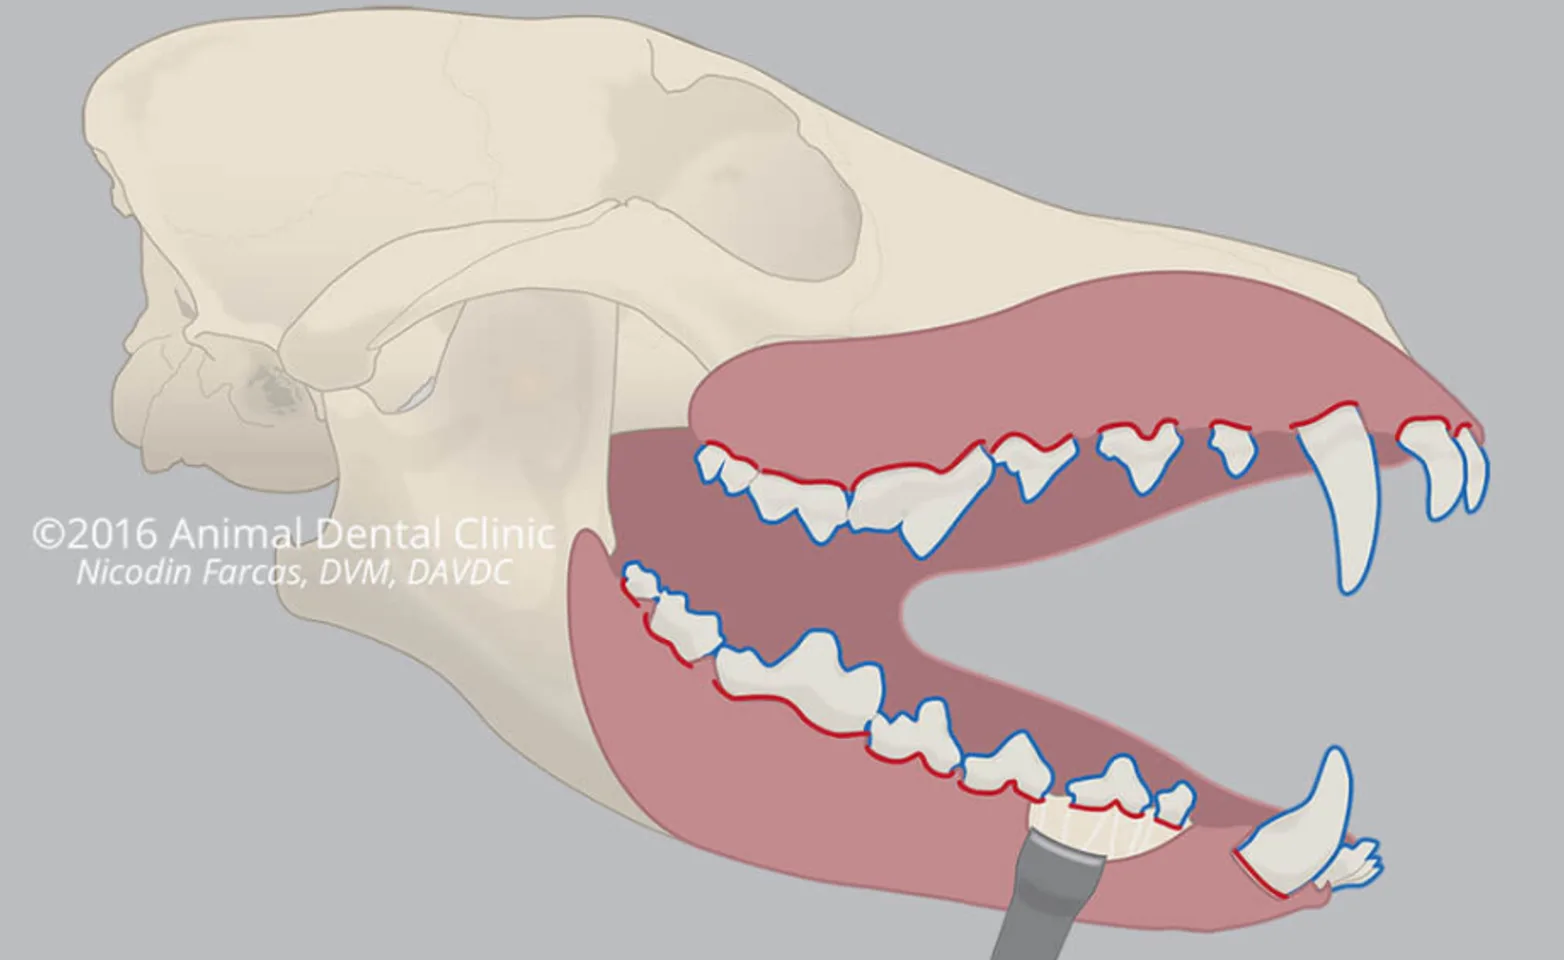 Diagram showing the oral barrier of an animal's mouth